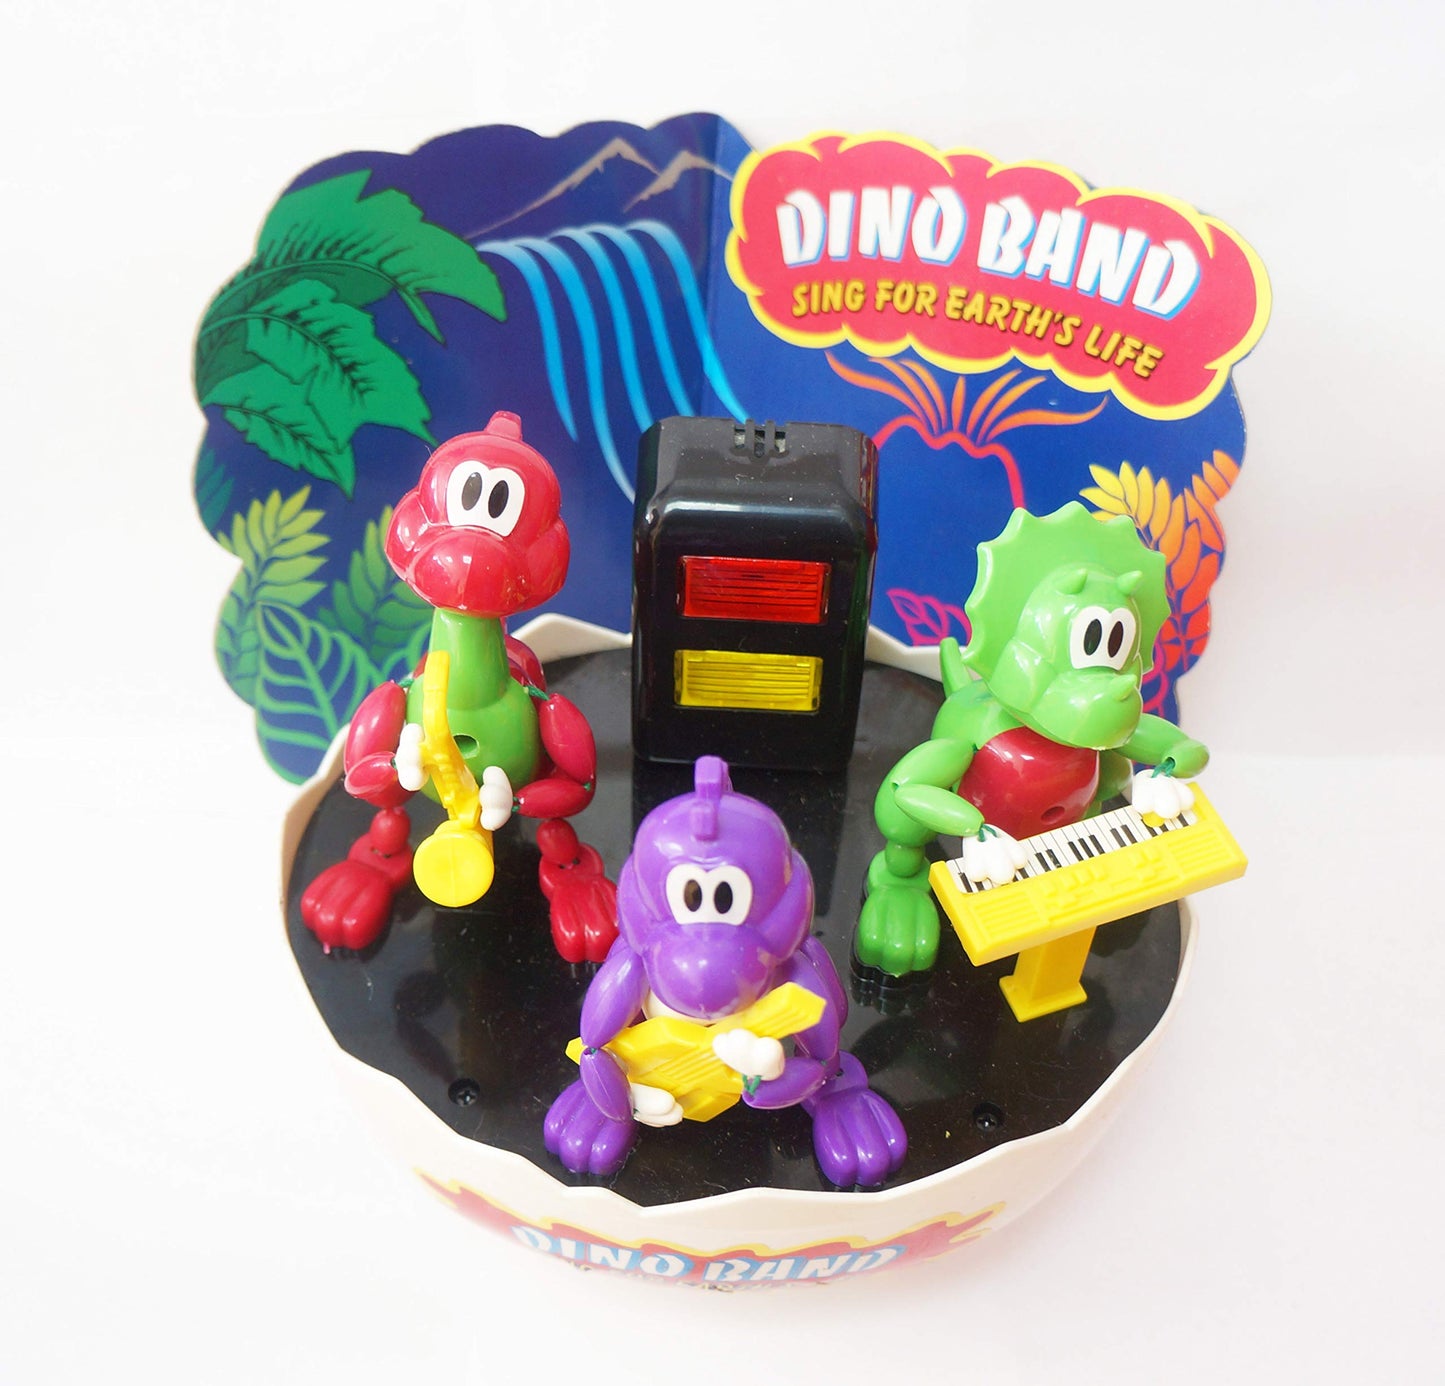 Vintage 1993 Dino Band Sing For Earths Life - Sound Activated Novelty Stage Show Toy - Complete In The Original Box - Shop Stock Room Find